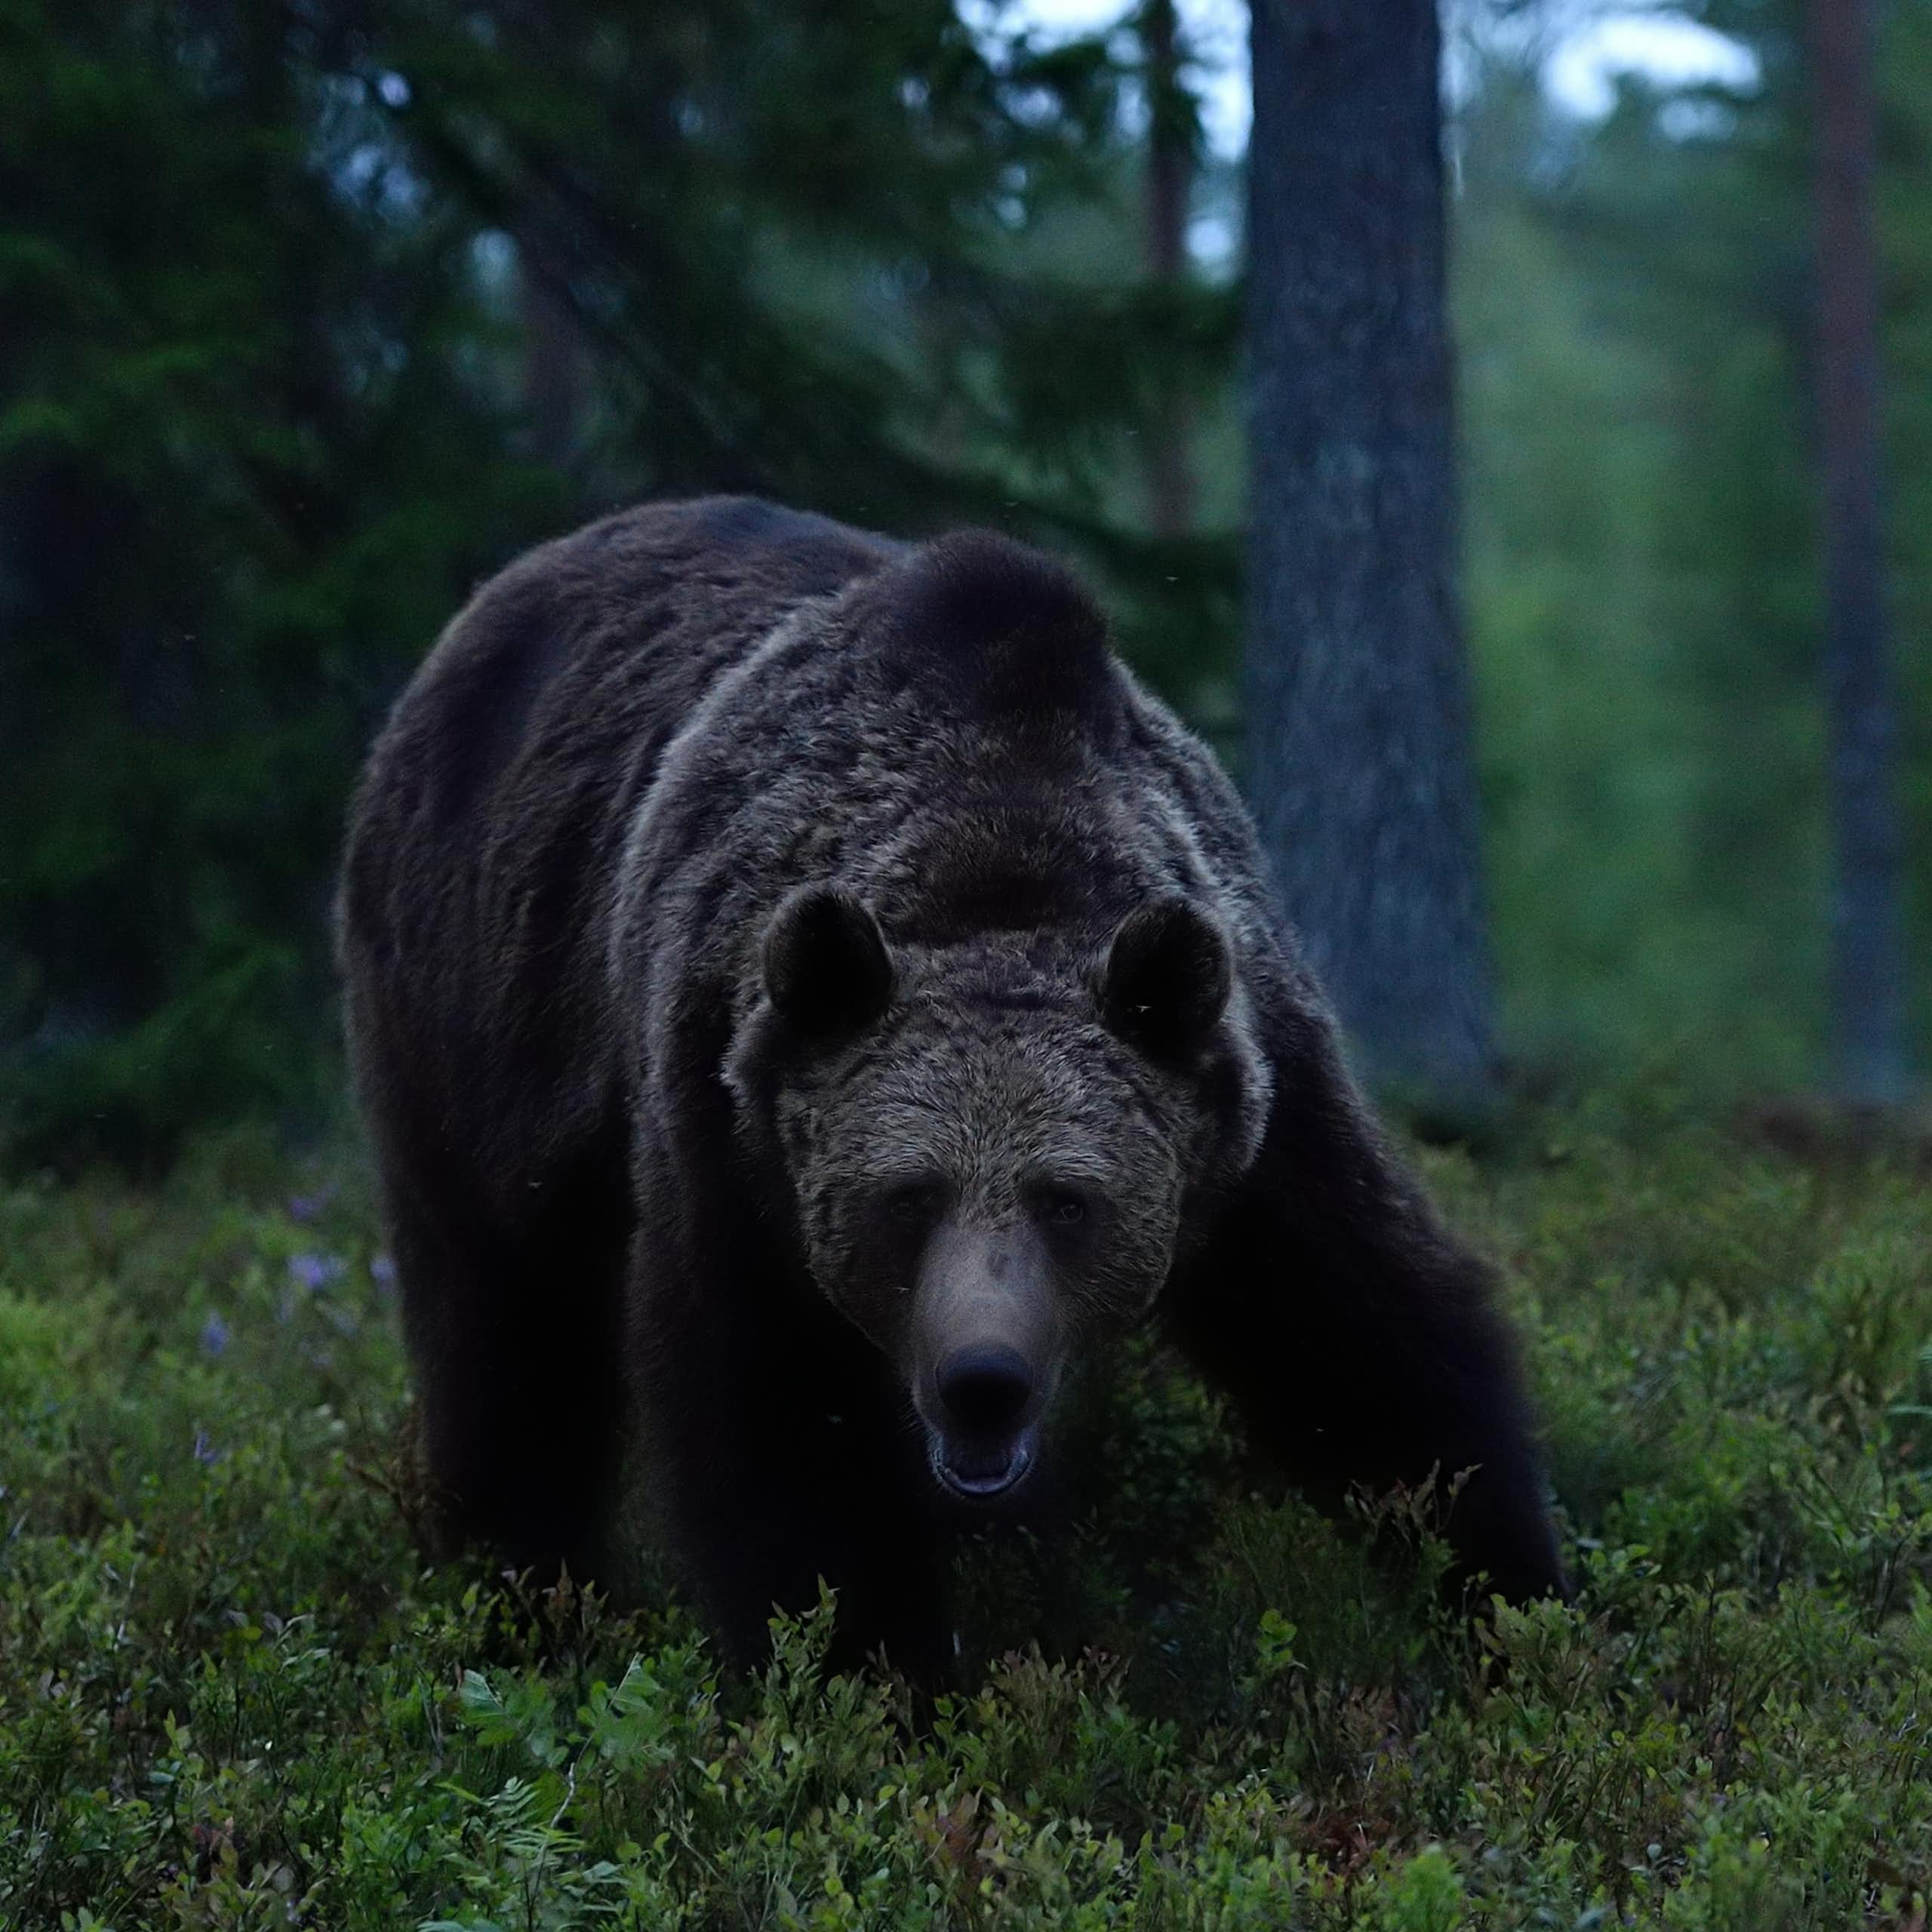 A large and menacing looking bear faces the camera at dusk in a forest